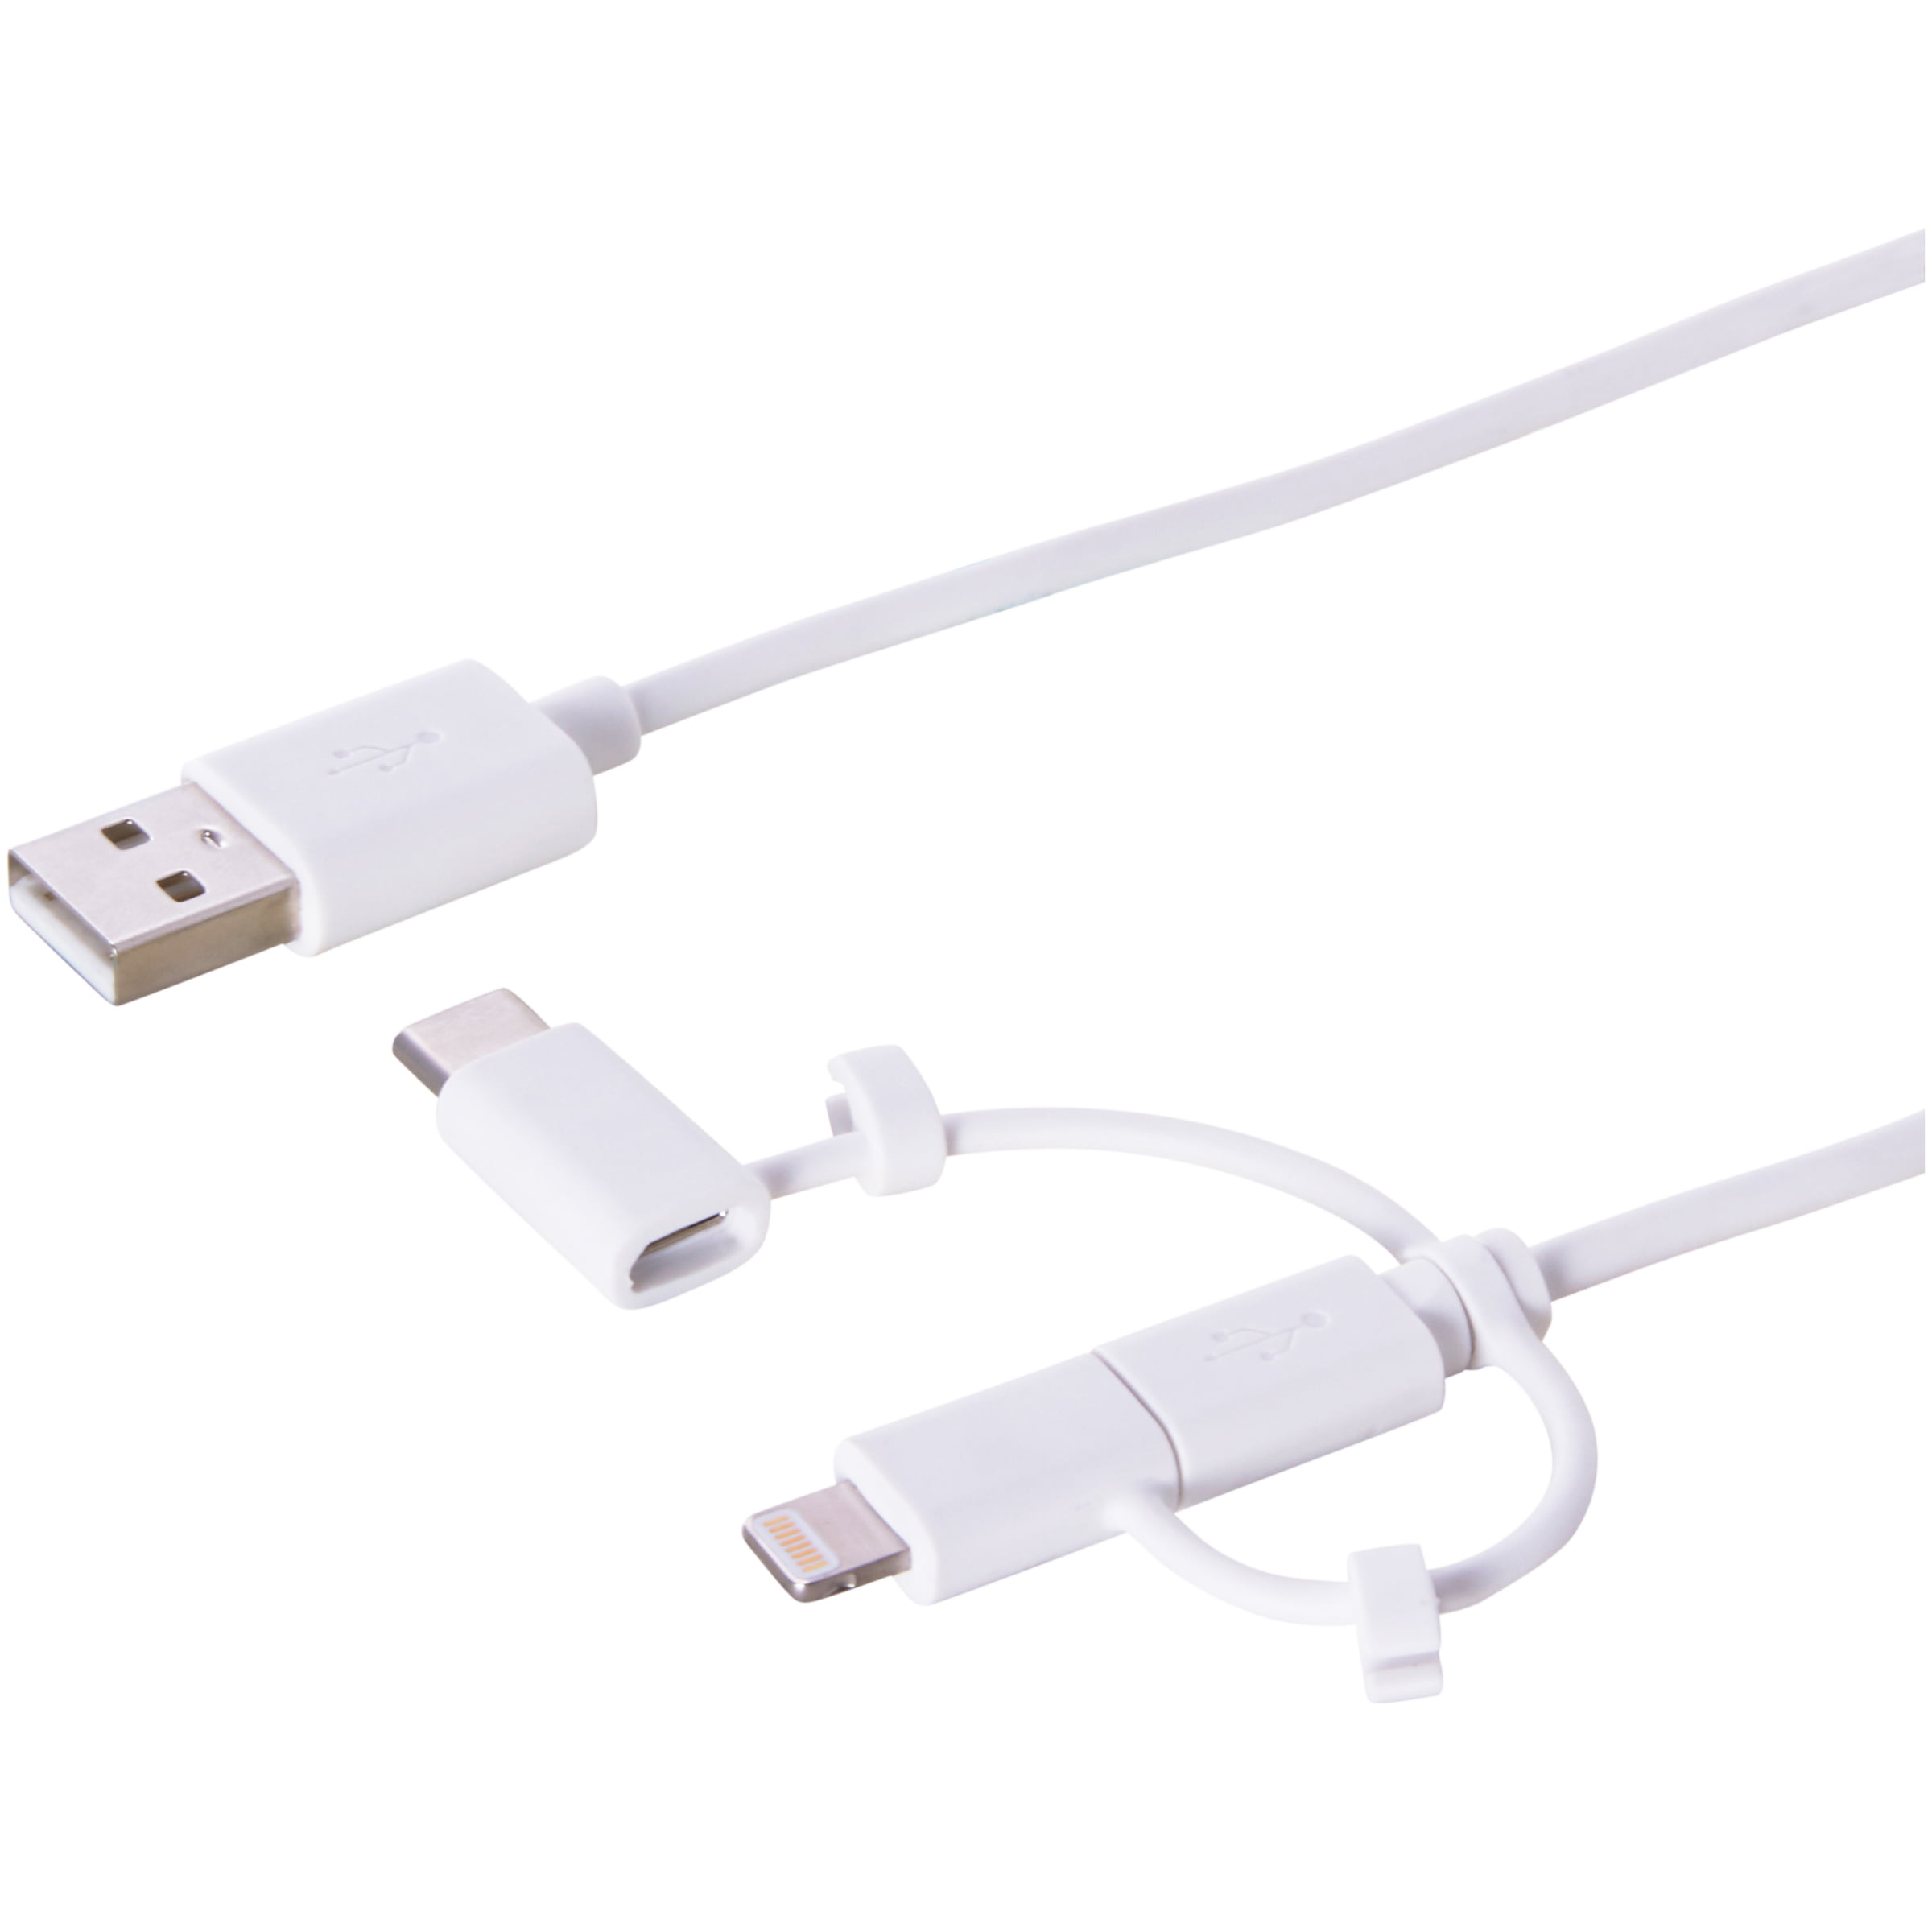 3 in 1 Retractable USB Charging Cable Northern Lights Fast Charging Washable Charging Cord Adapter Compatible with Cell Phones Tablets Universal Use